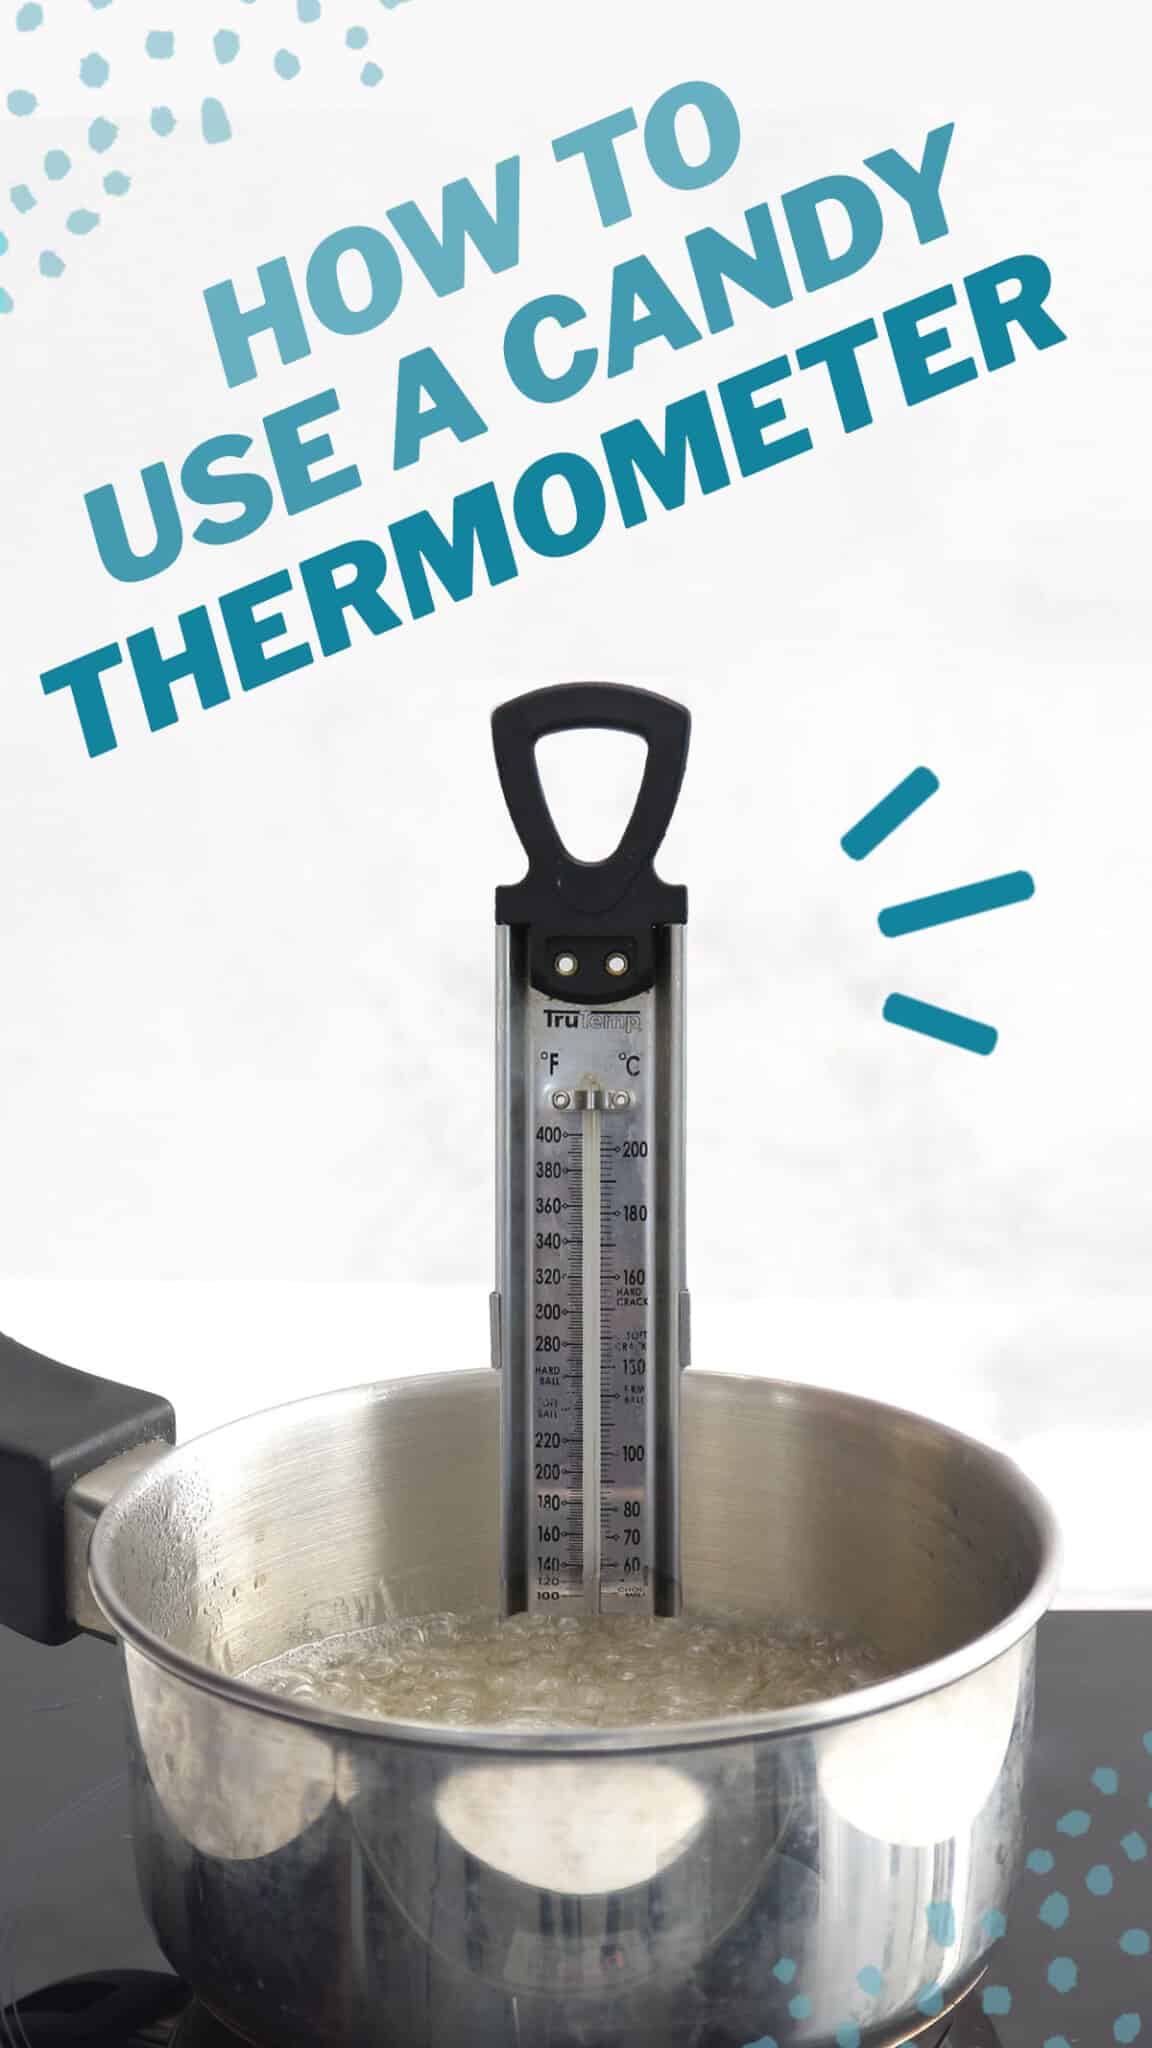 Picture of a candy thermometer in a pot of boiling candy, with text overlay for Pinterest.